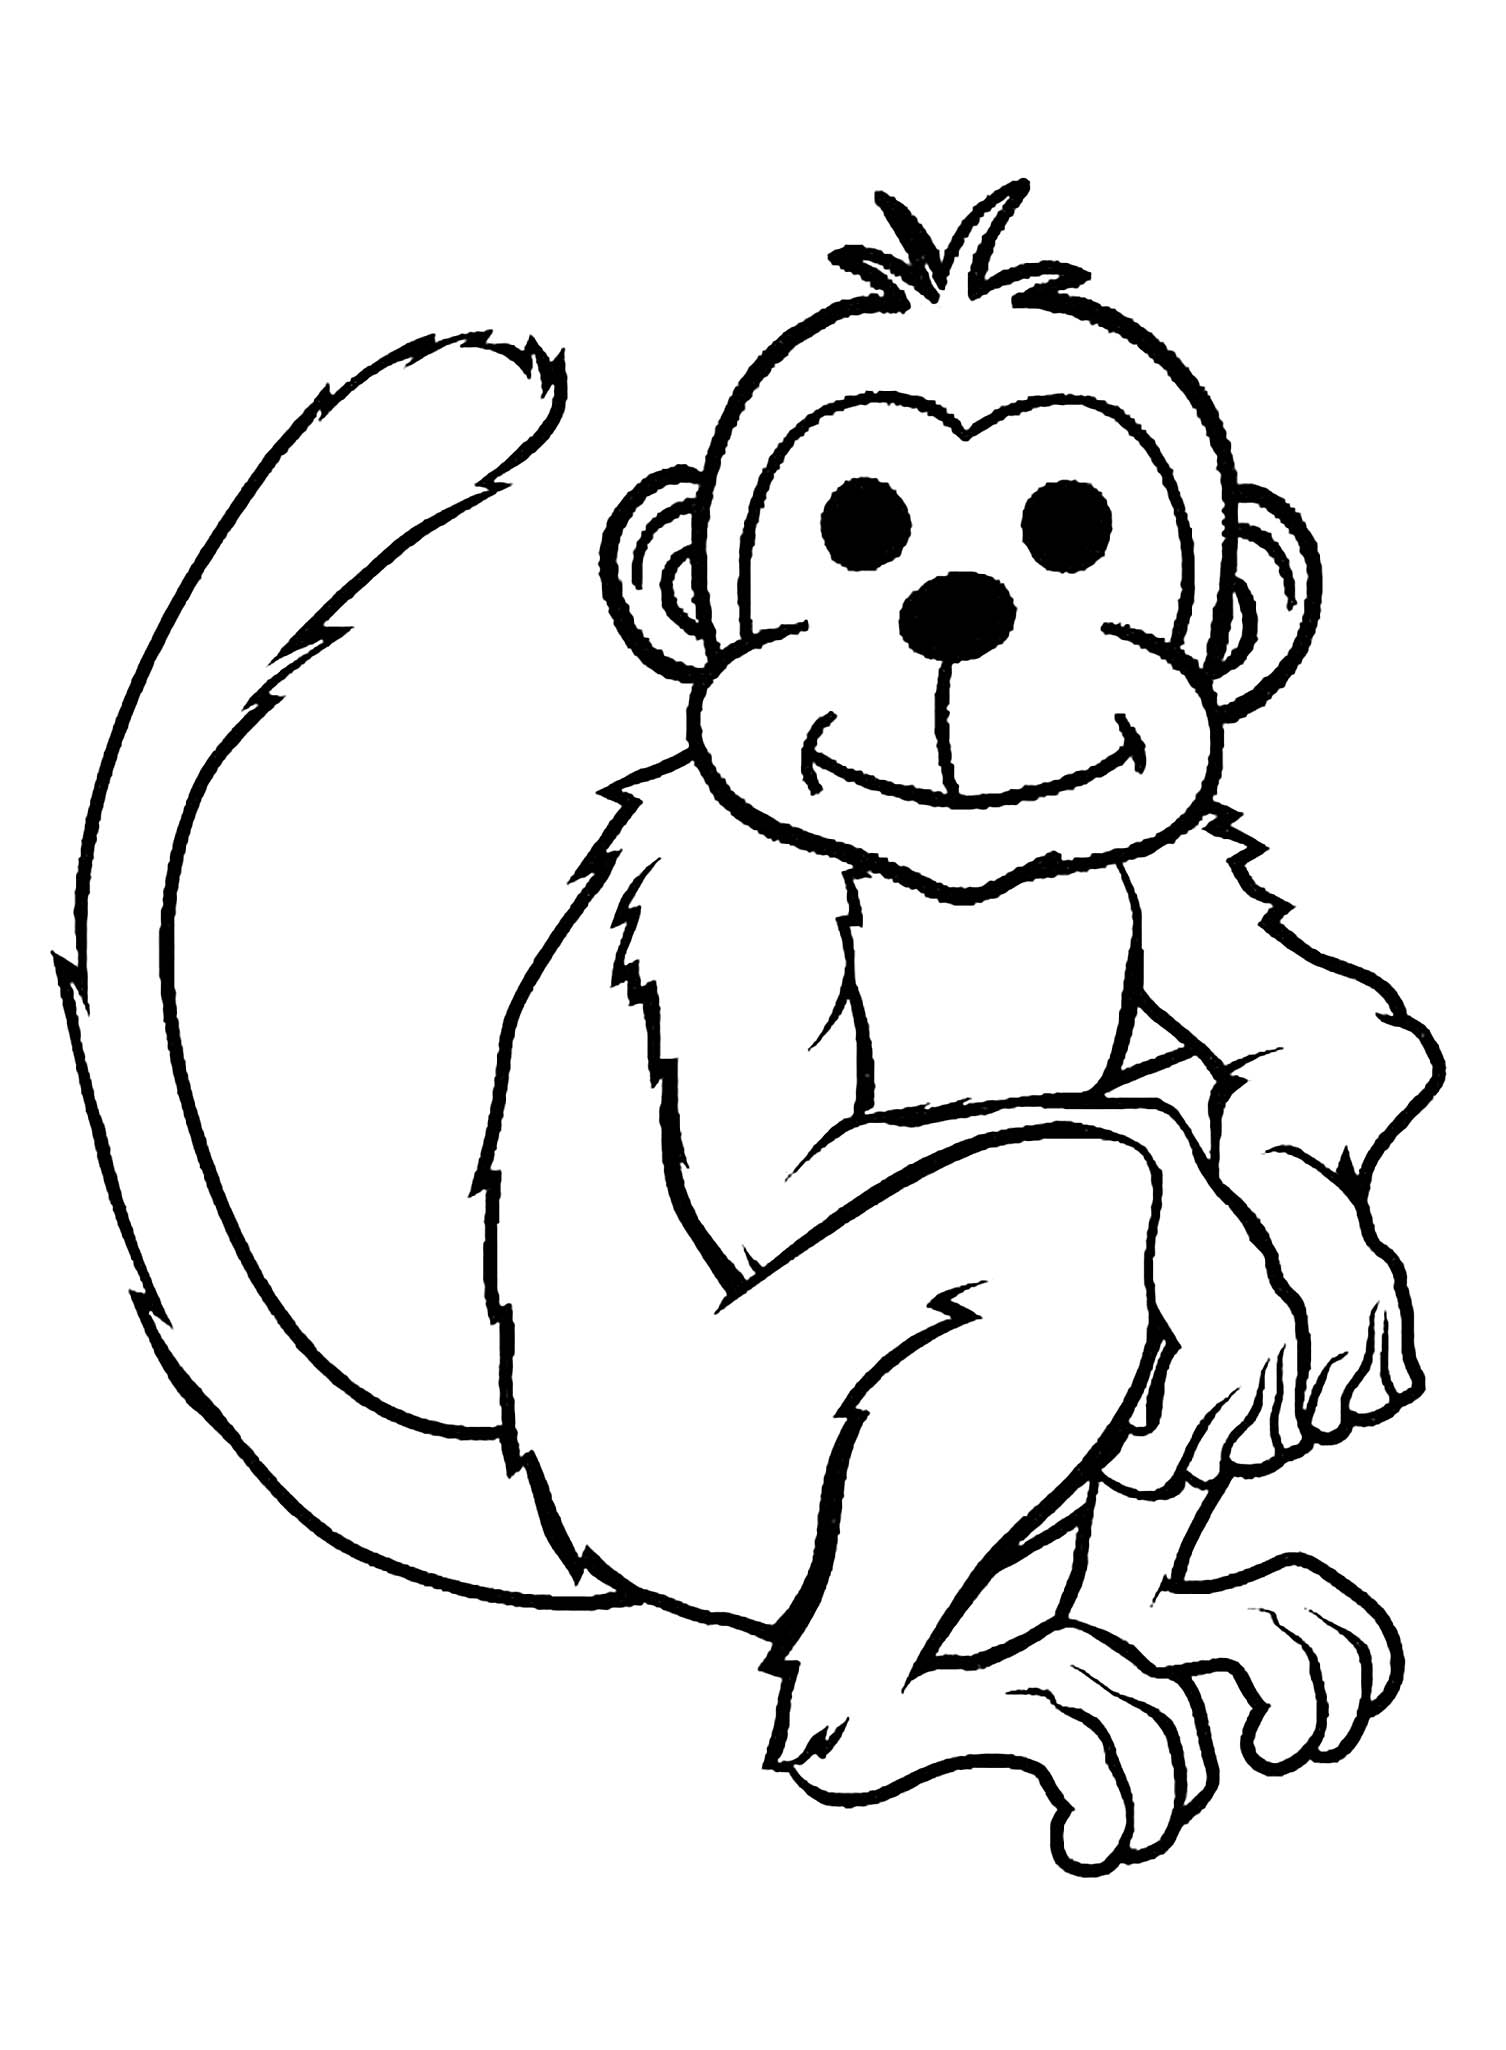 Monkeys to download - Monkeys Kids Coloring Pages